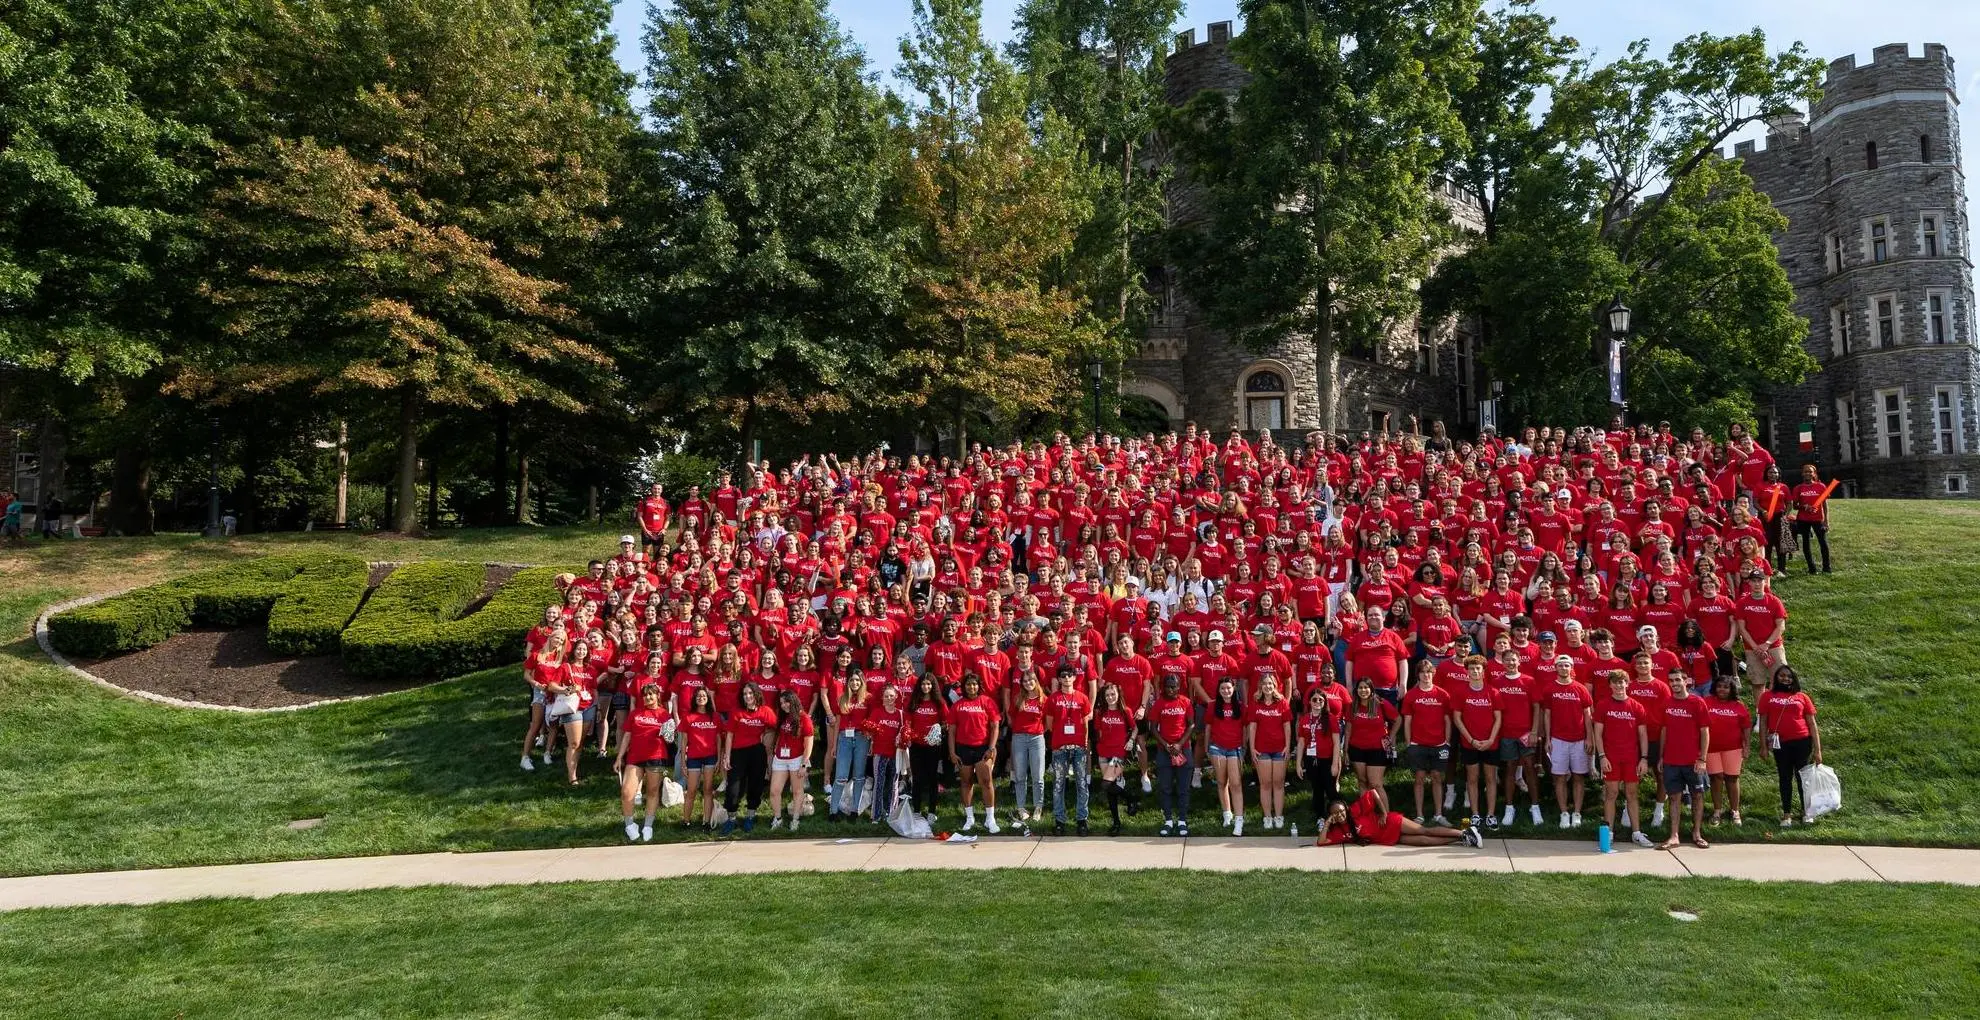 A sea of red forms from a large group of students standing together outside.